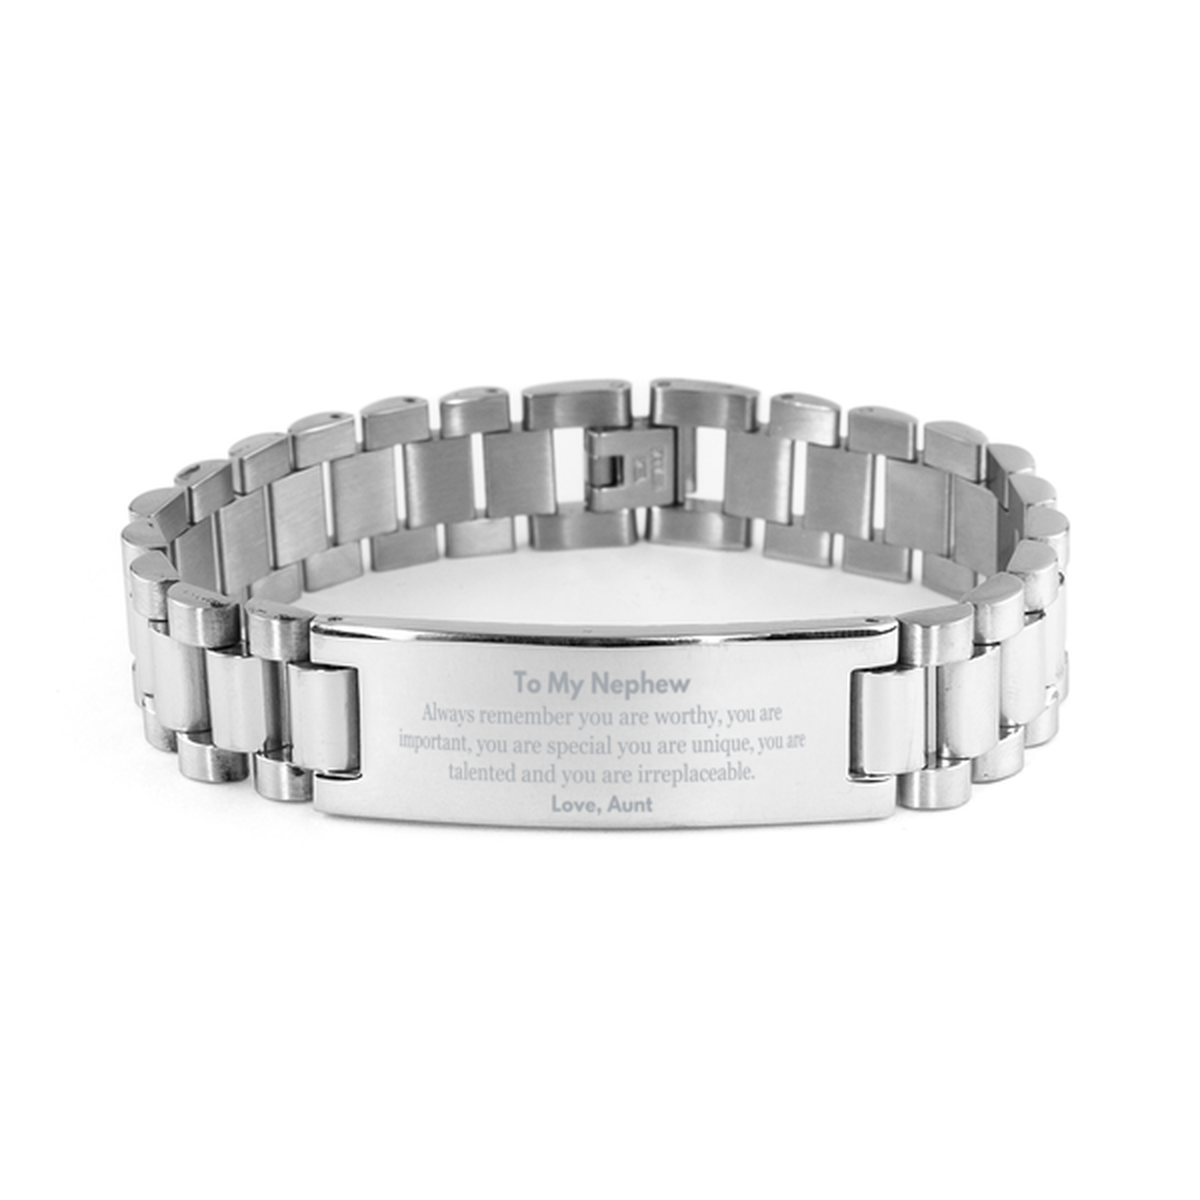 Nephew Birthday Gifts from Aunt, Inspirational Ladder Stainless Steel Bracelet for Nephew Christmas Graduation Gifts for Nephew Always remember you are worthy, you are important. Love, Aunt